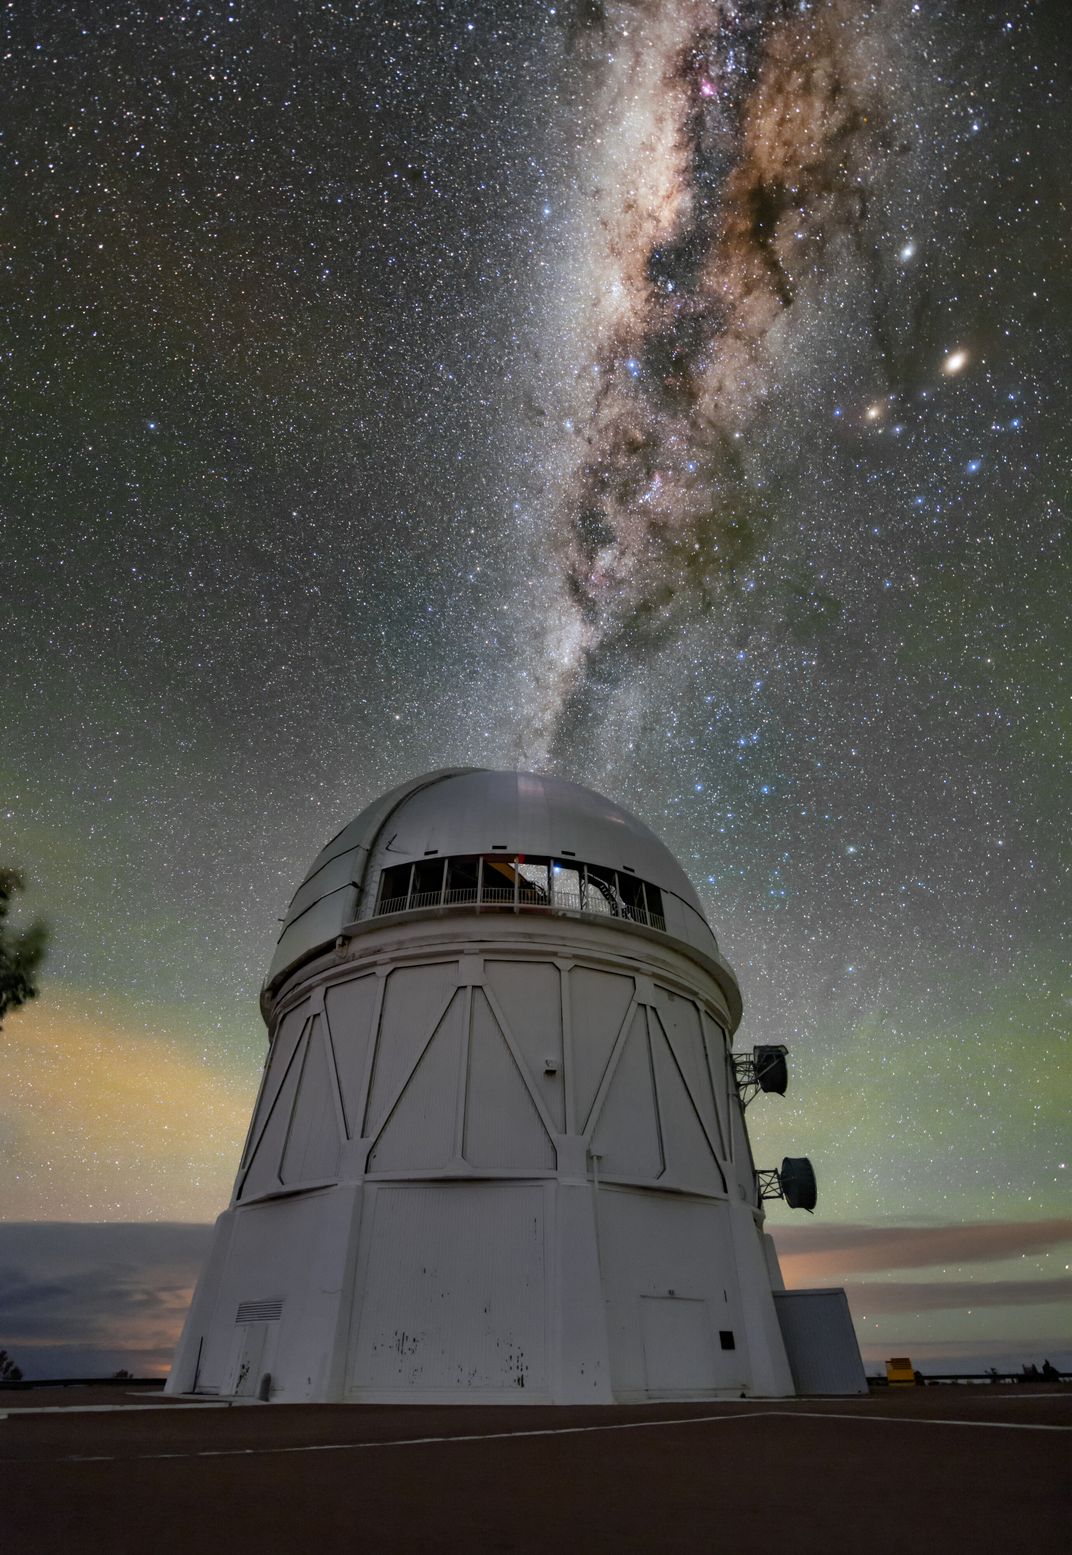 A photograph of the Victor M. Blanco Telescope in Chile with the glow of stars in the sky behind it.